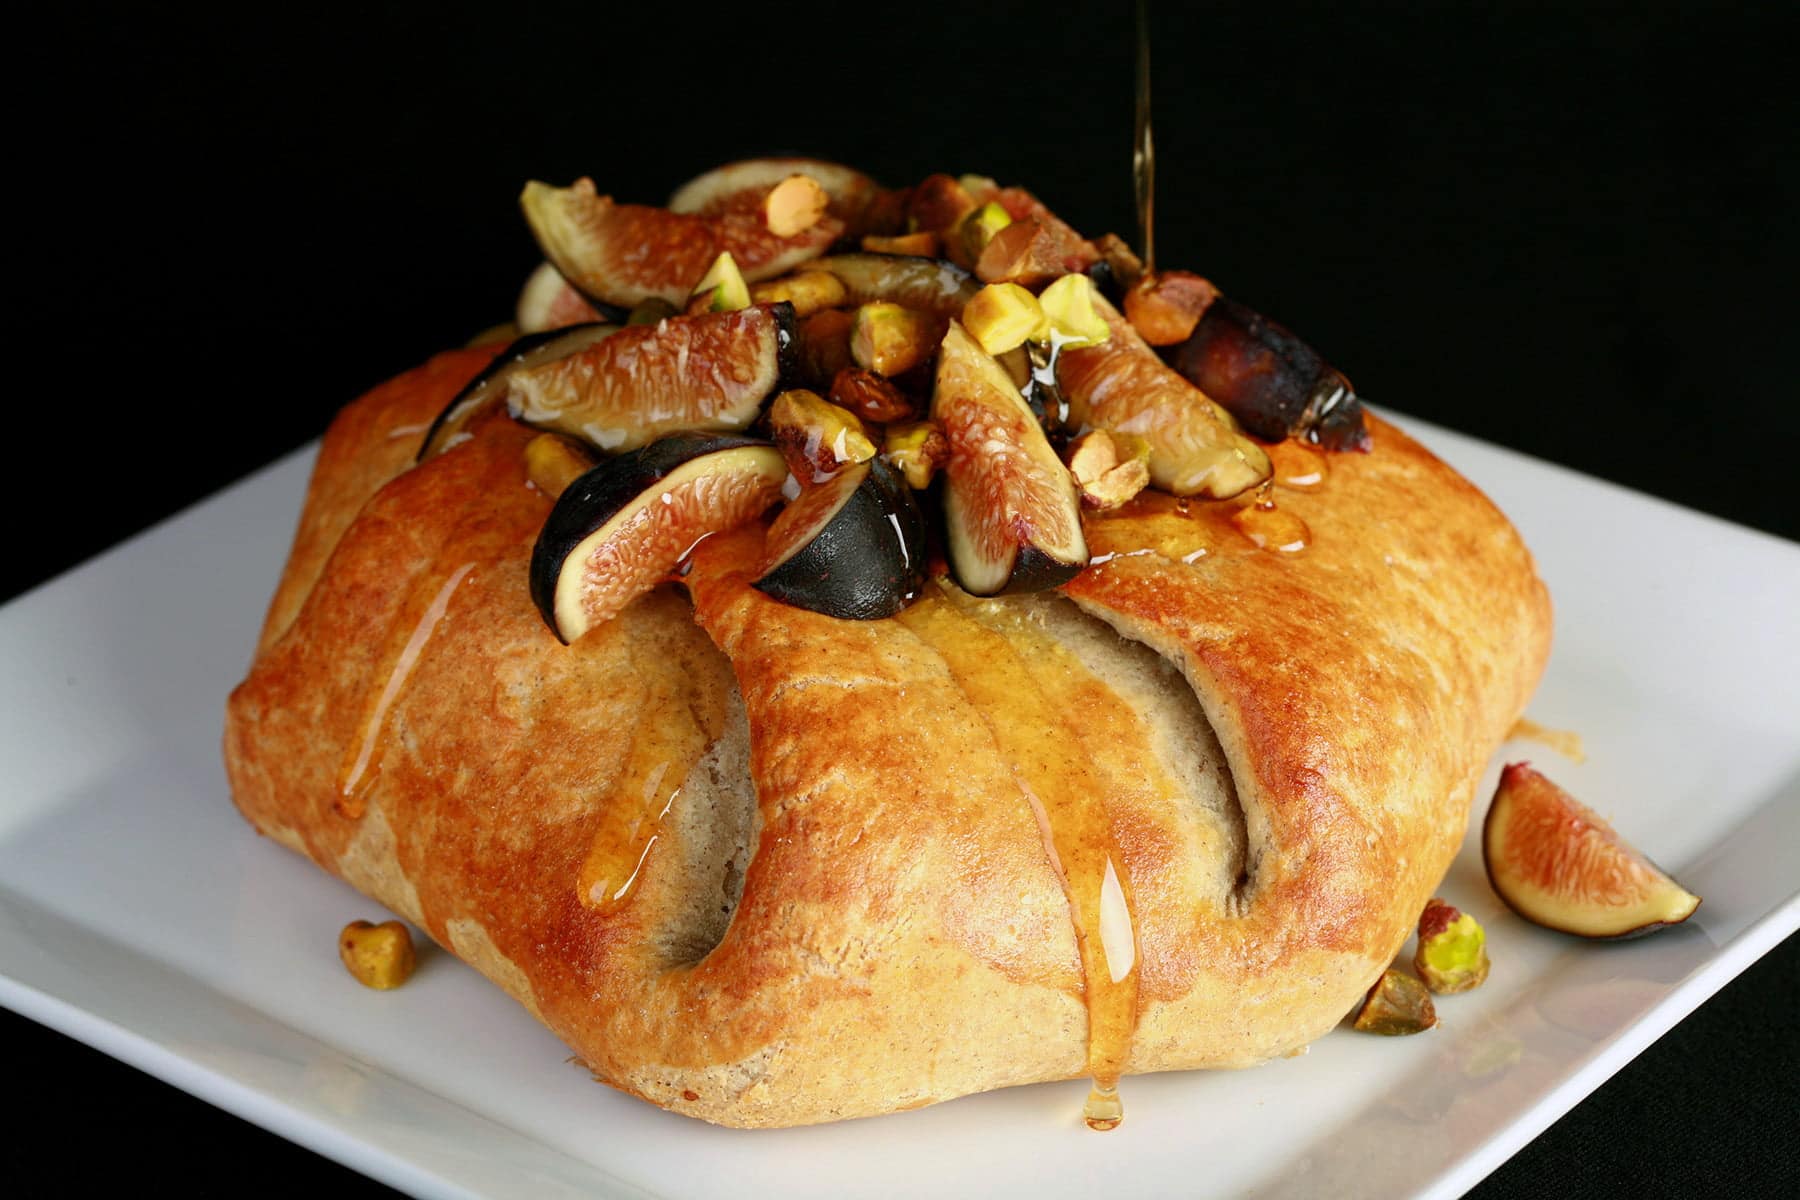 Sliced figs, pistachio, and honey top a round, gathered, golden brown pastry.